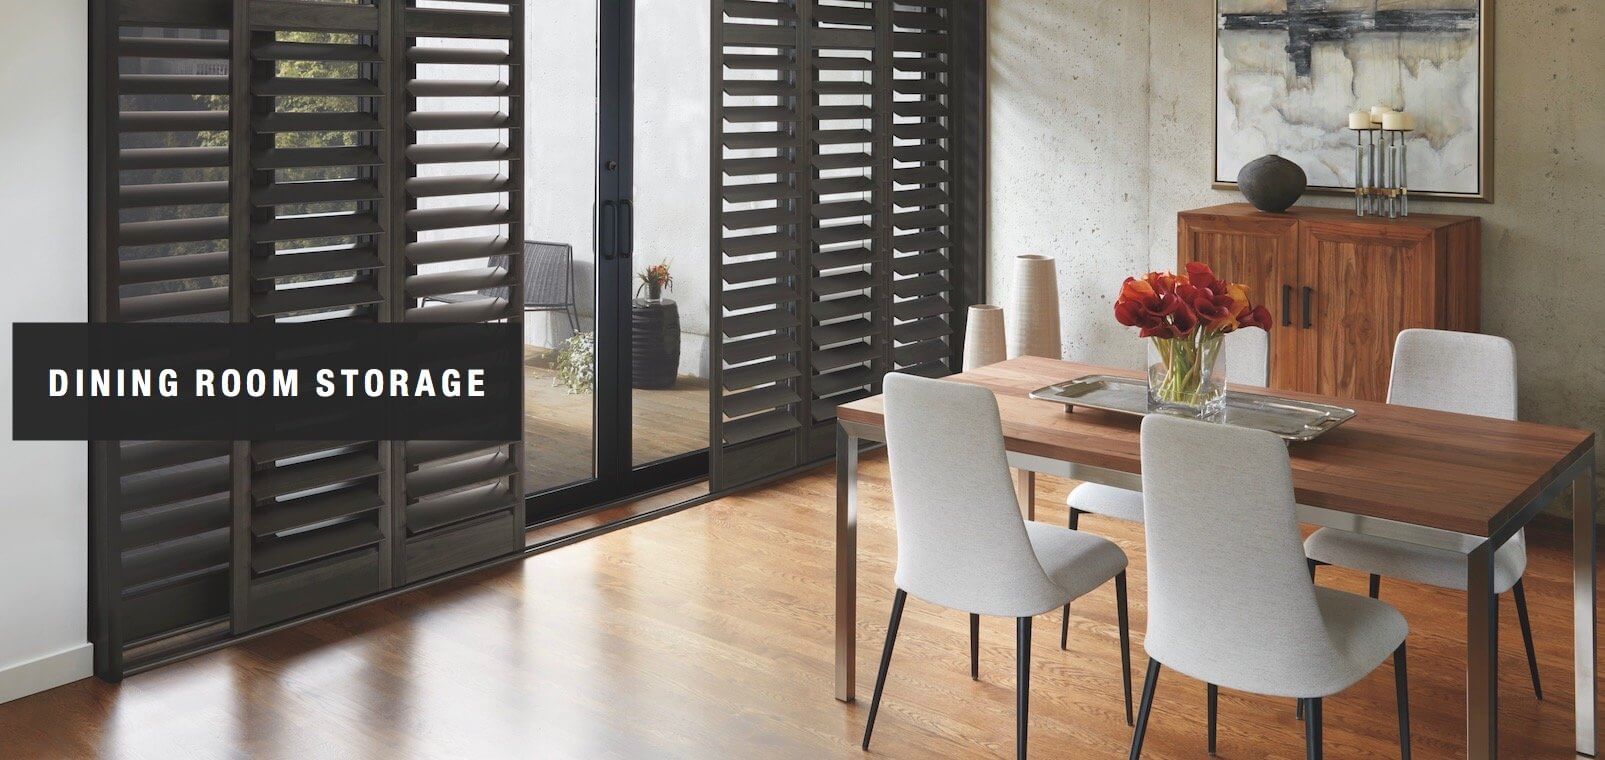 Dining room storage adds beauty and function. Shown with NewStyle™ hybrid shutters.